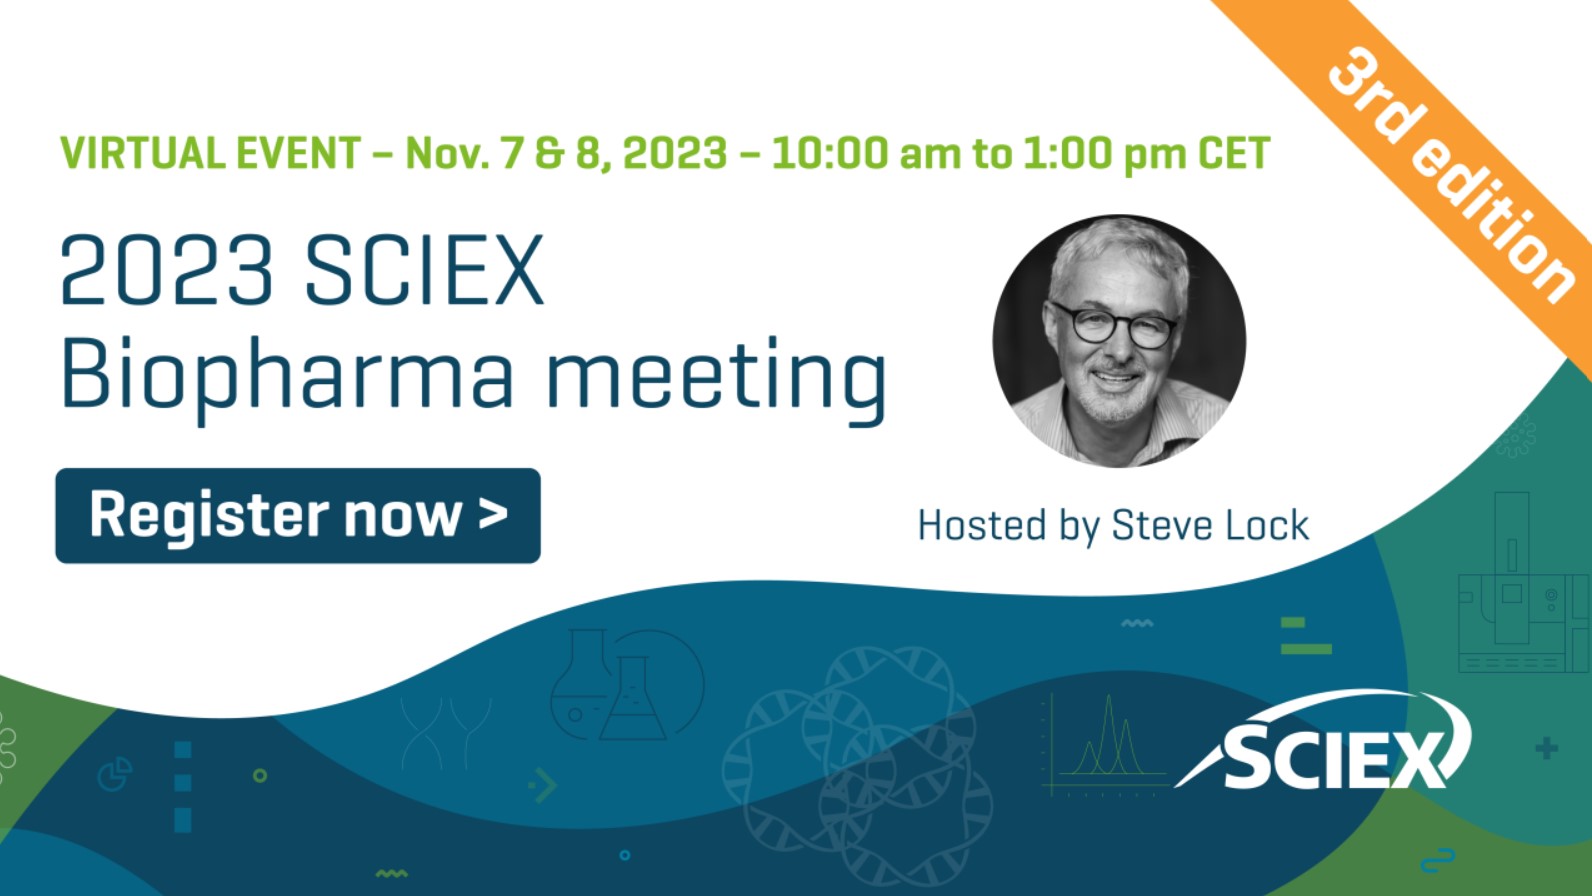 SCIEX: SCIEX Biopharma meeting - 3rd edition! Day 1 - Gene therapy, vaccines and oligonucleotides